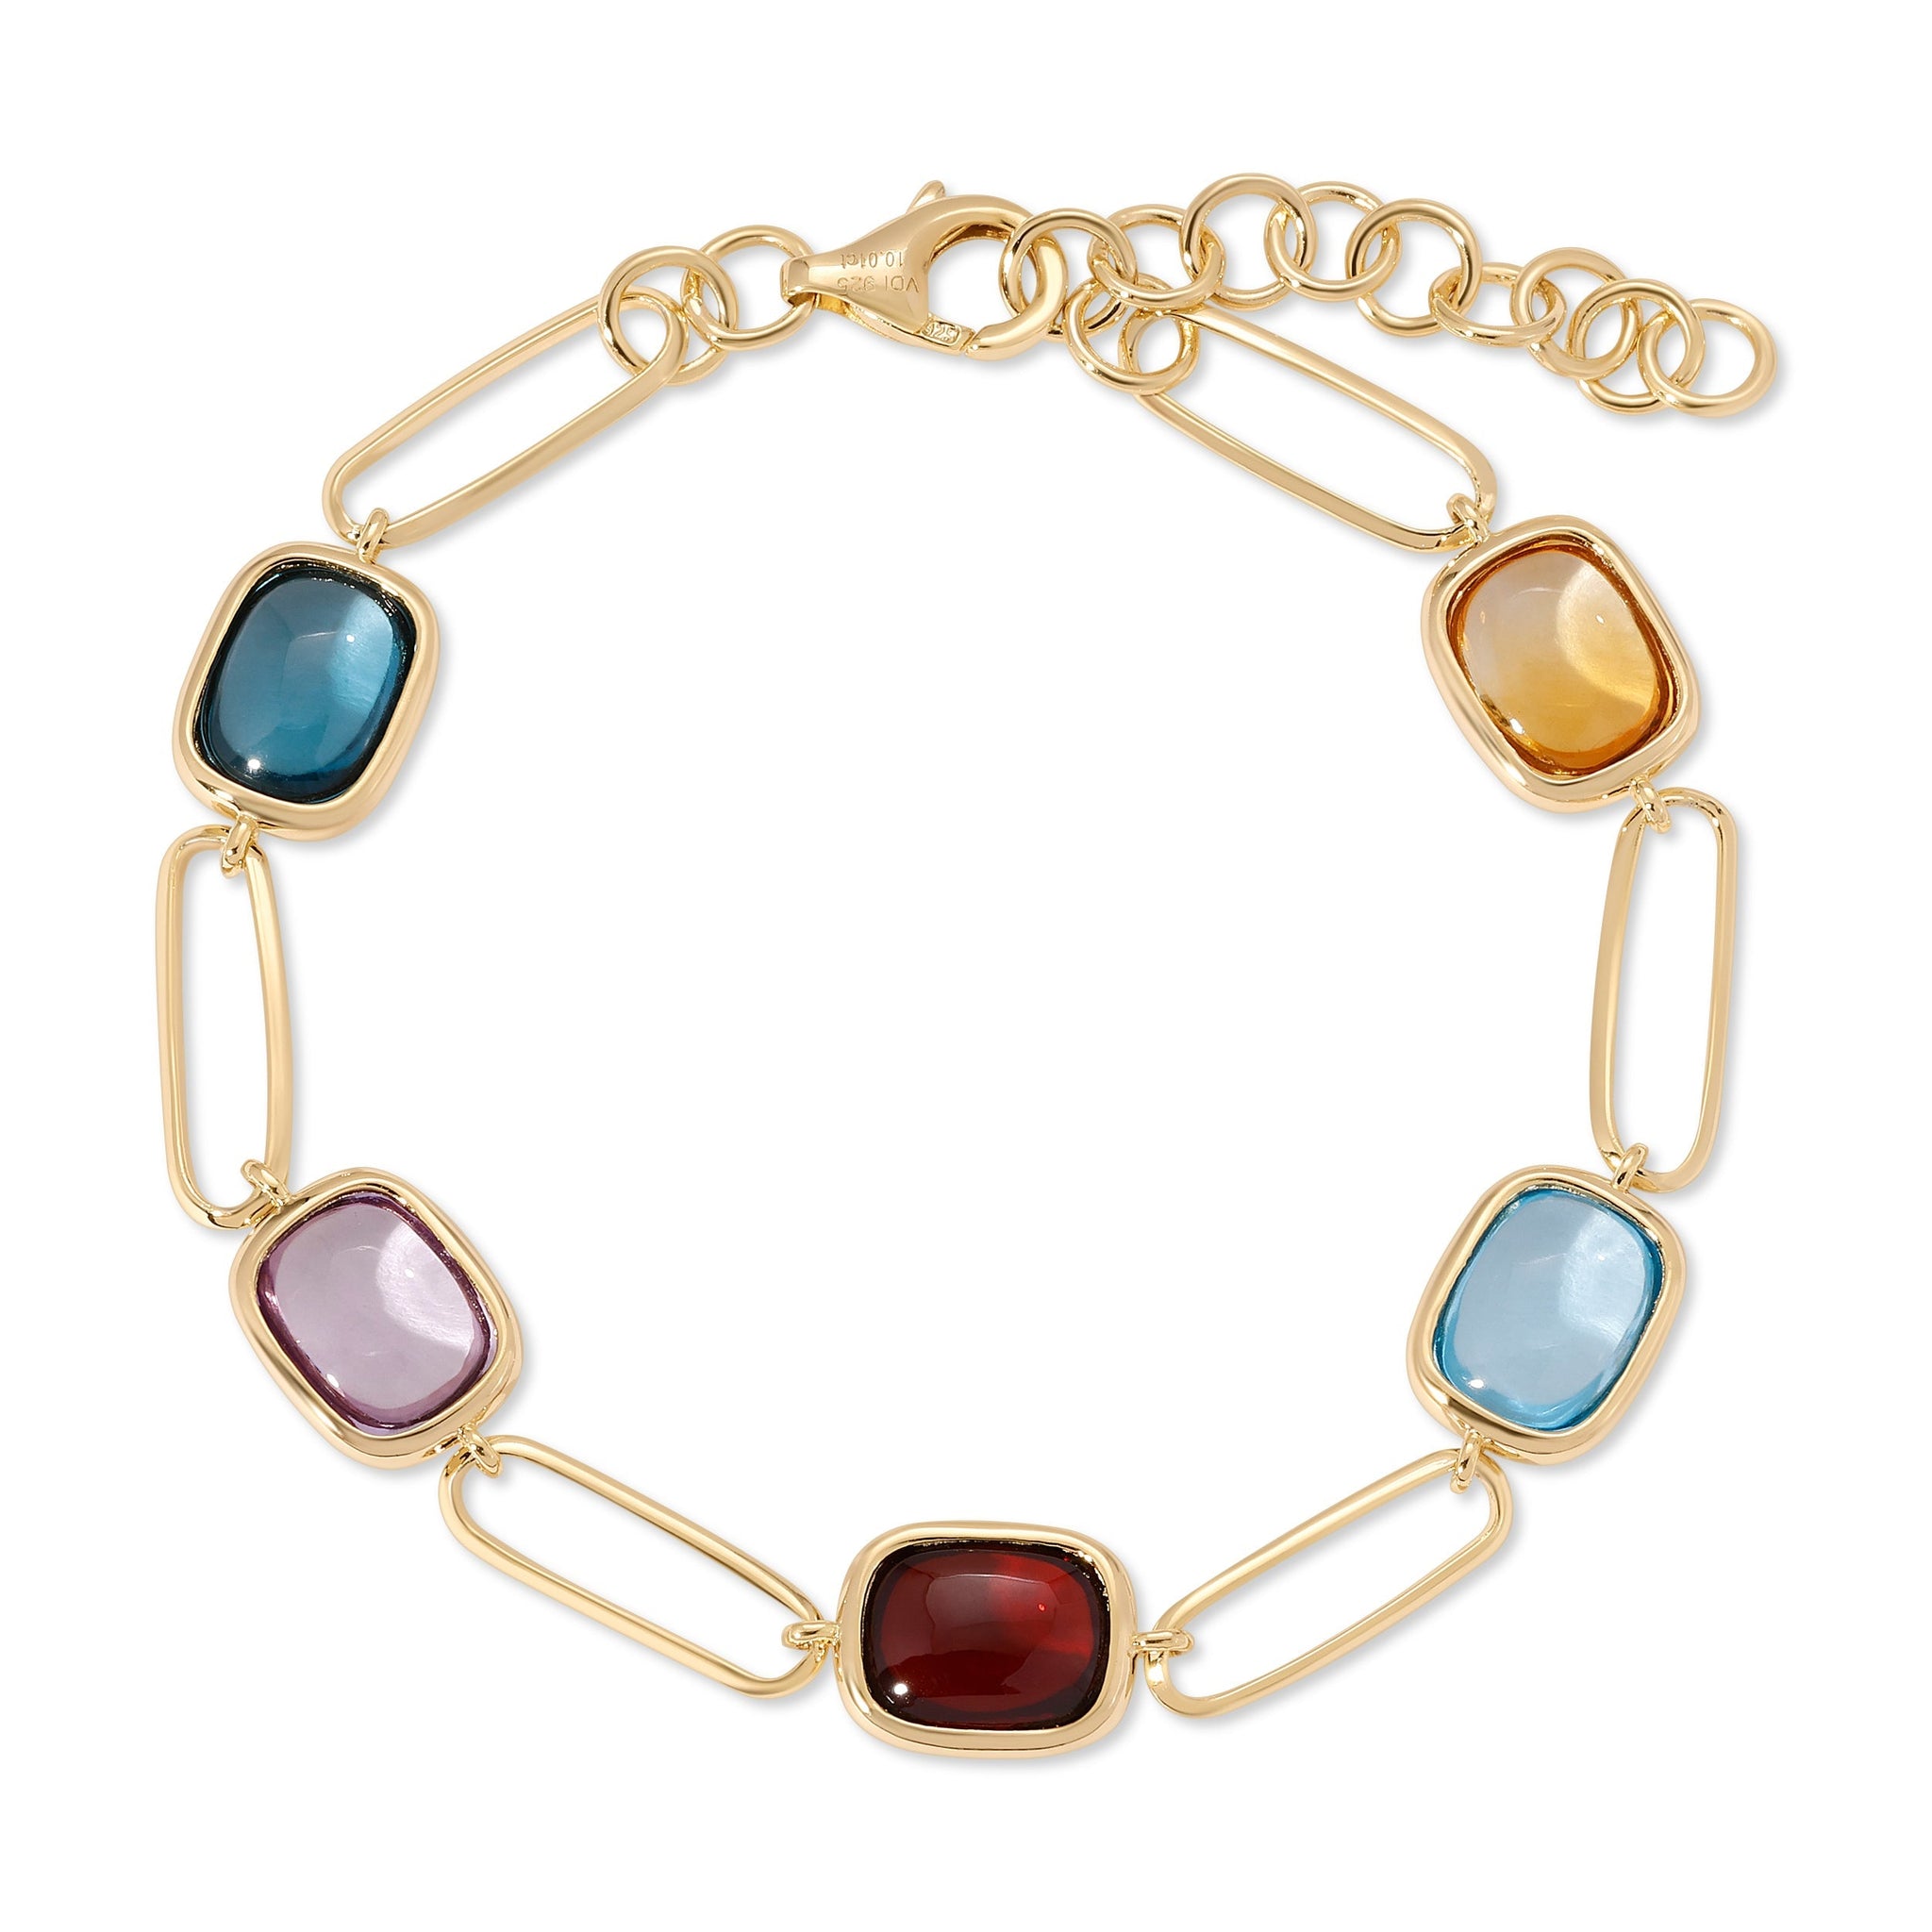 Color Candy Collection Bracelet 14.24 ctw with 6 Cushion Shape Multi Gemstone on 6.332 gr Gold Plated Silver.